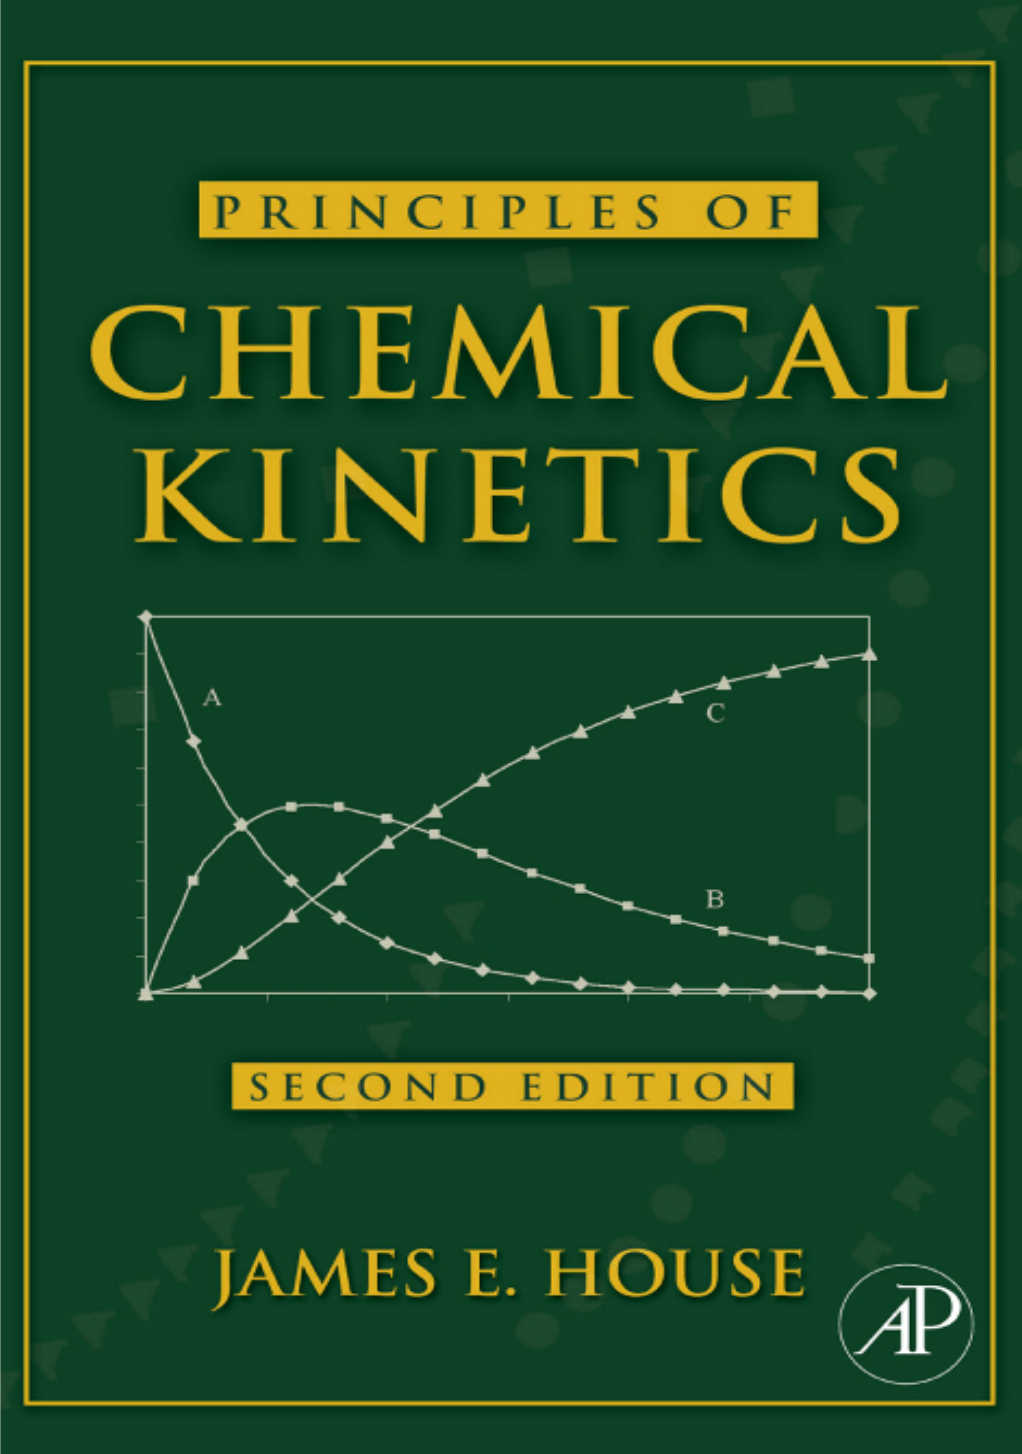 Principles Of Chemical Kinetics 2nd Ed Cinetica Quimica 34